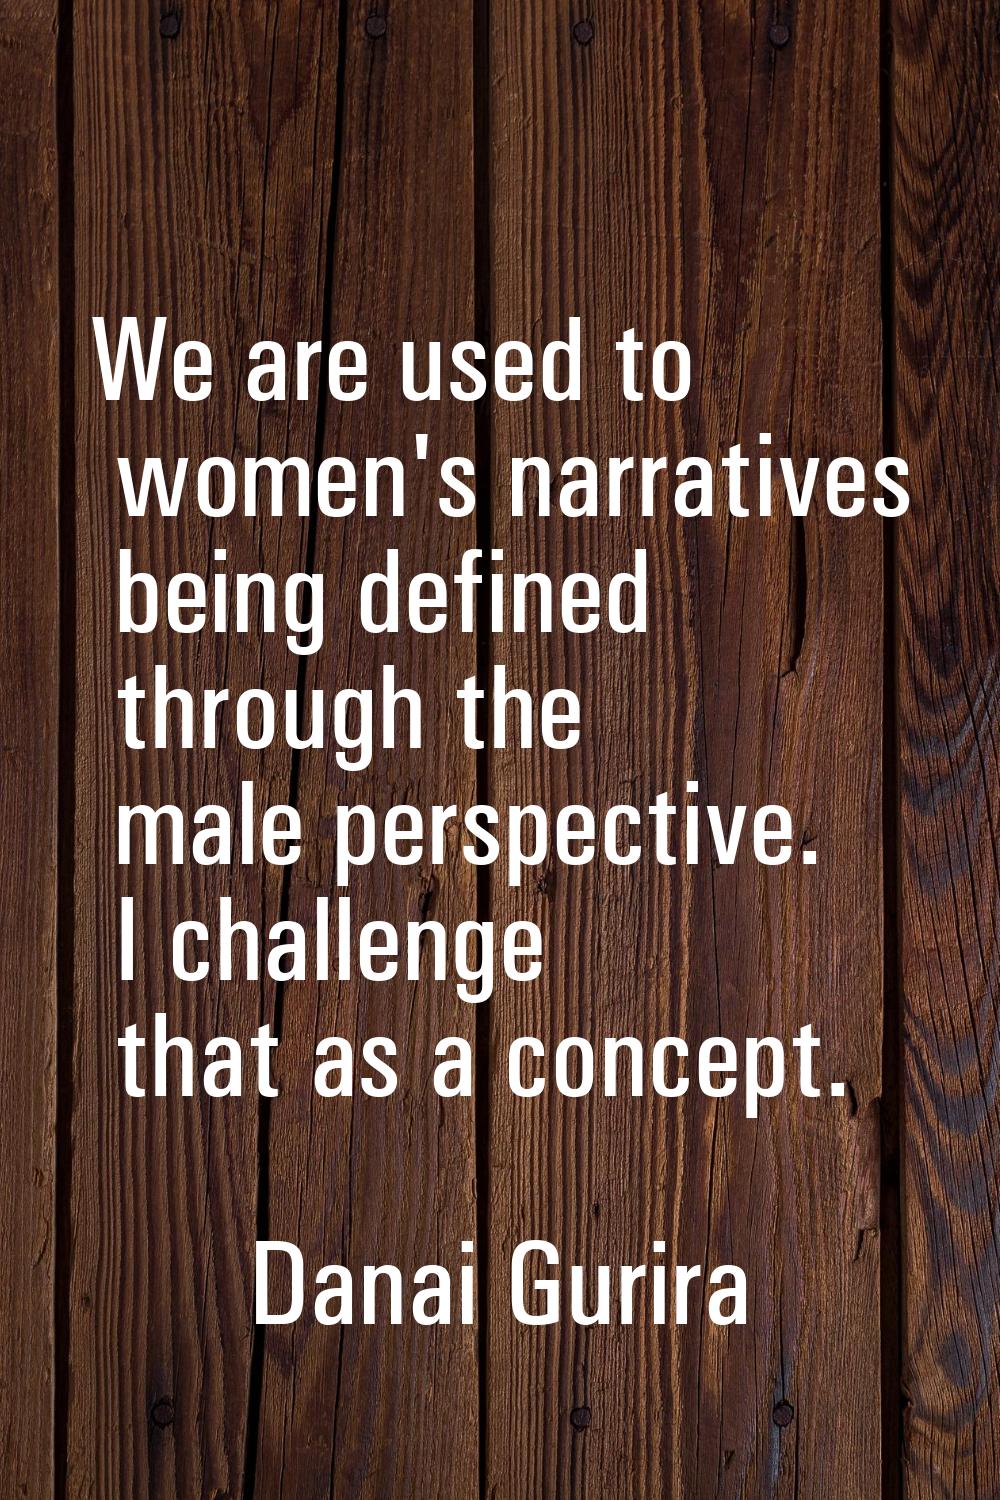 We are used to women's narratives being defined through the male perspective. I challenge that as a